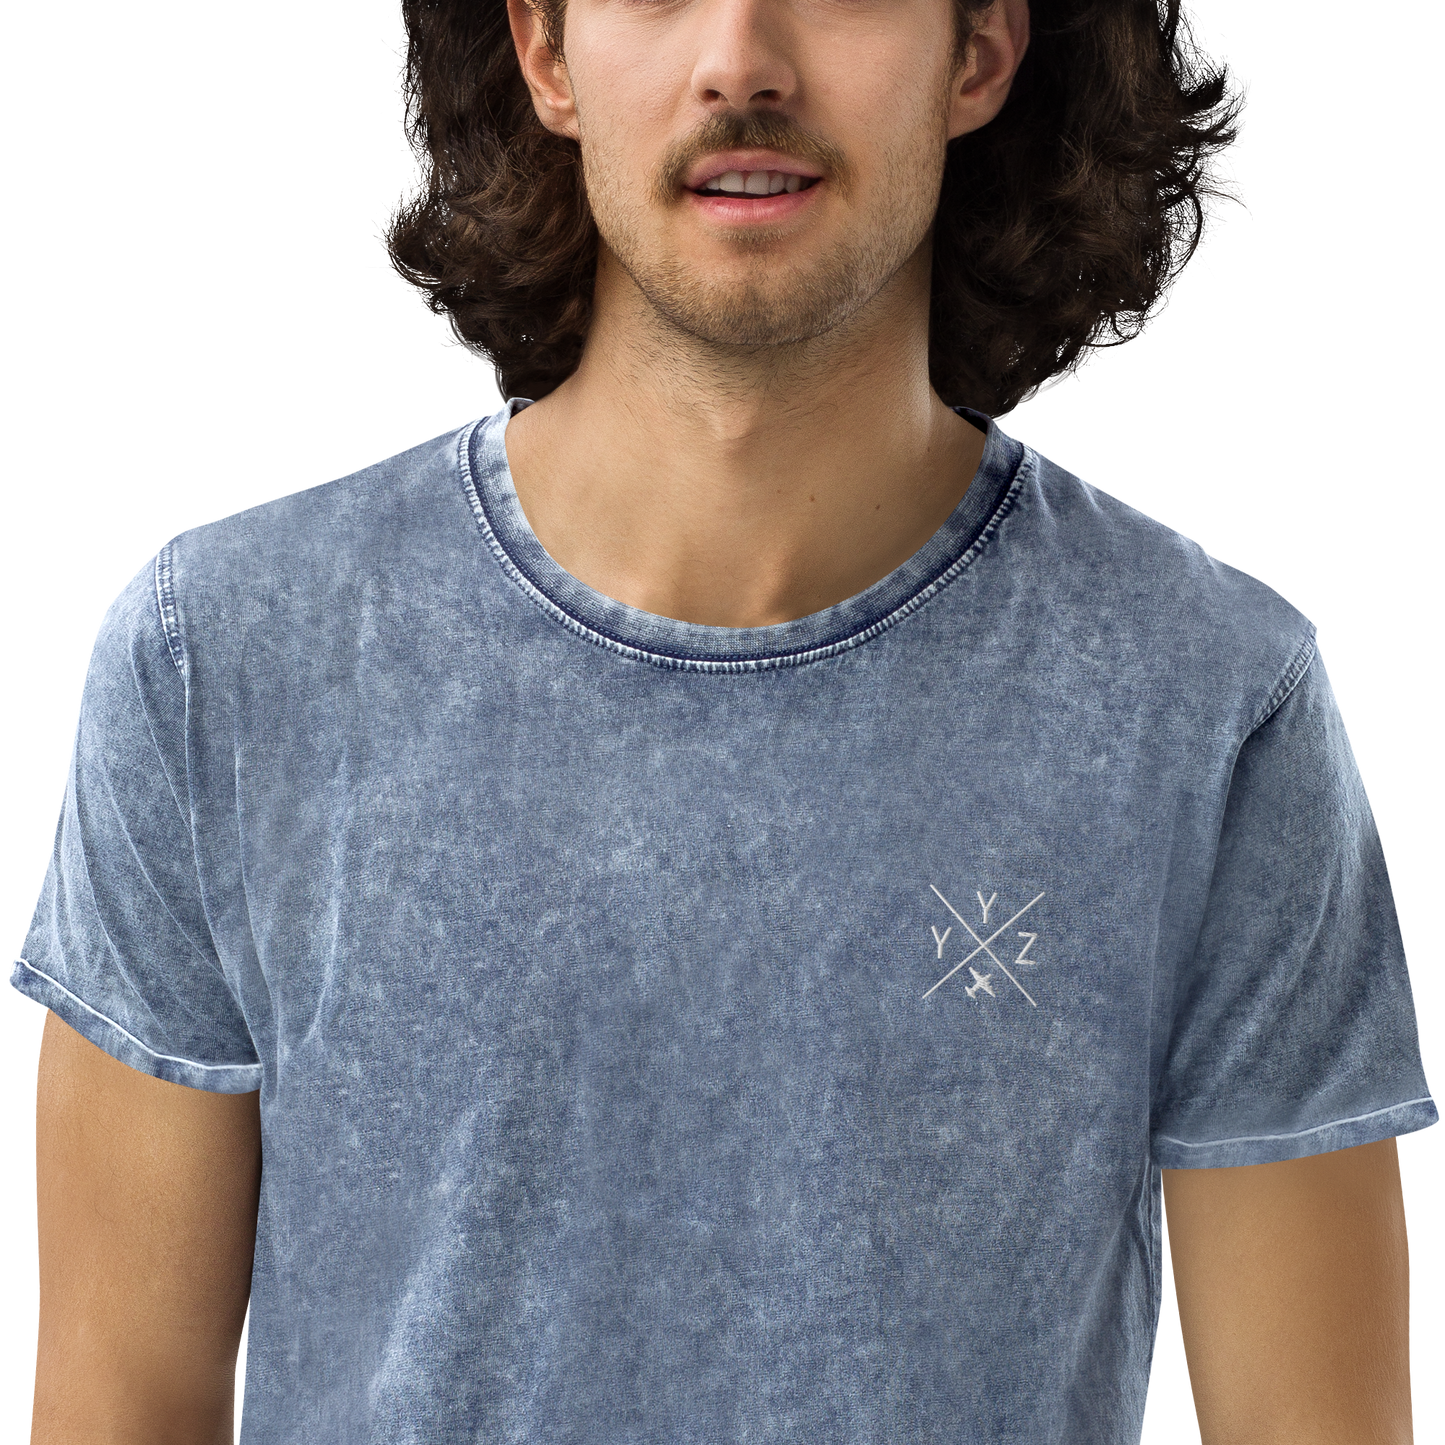 YHM Designs - YYZ Toronto Denim T-Shirt - Crossed-X Design with Airport Code and Vintage Propliner - White Embroidery - Image 12